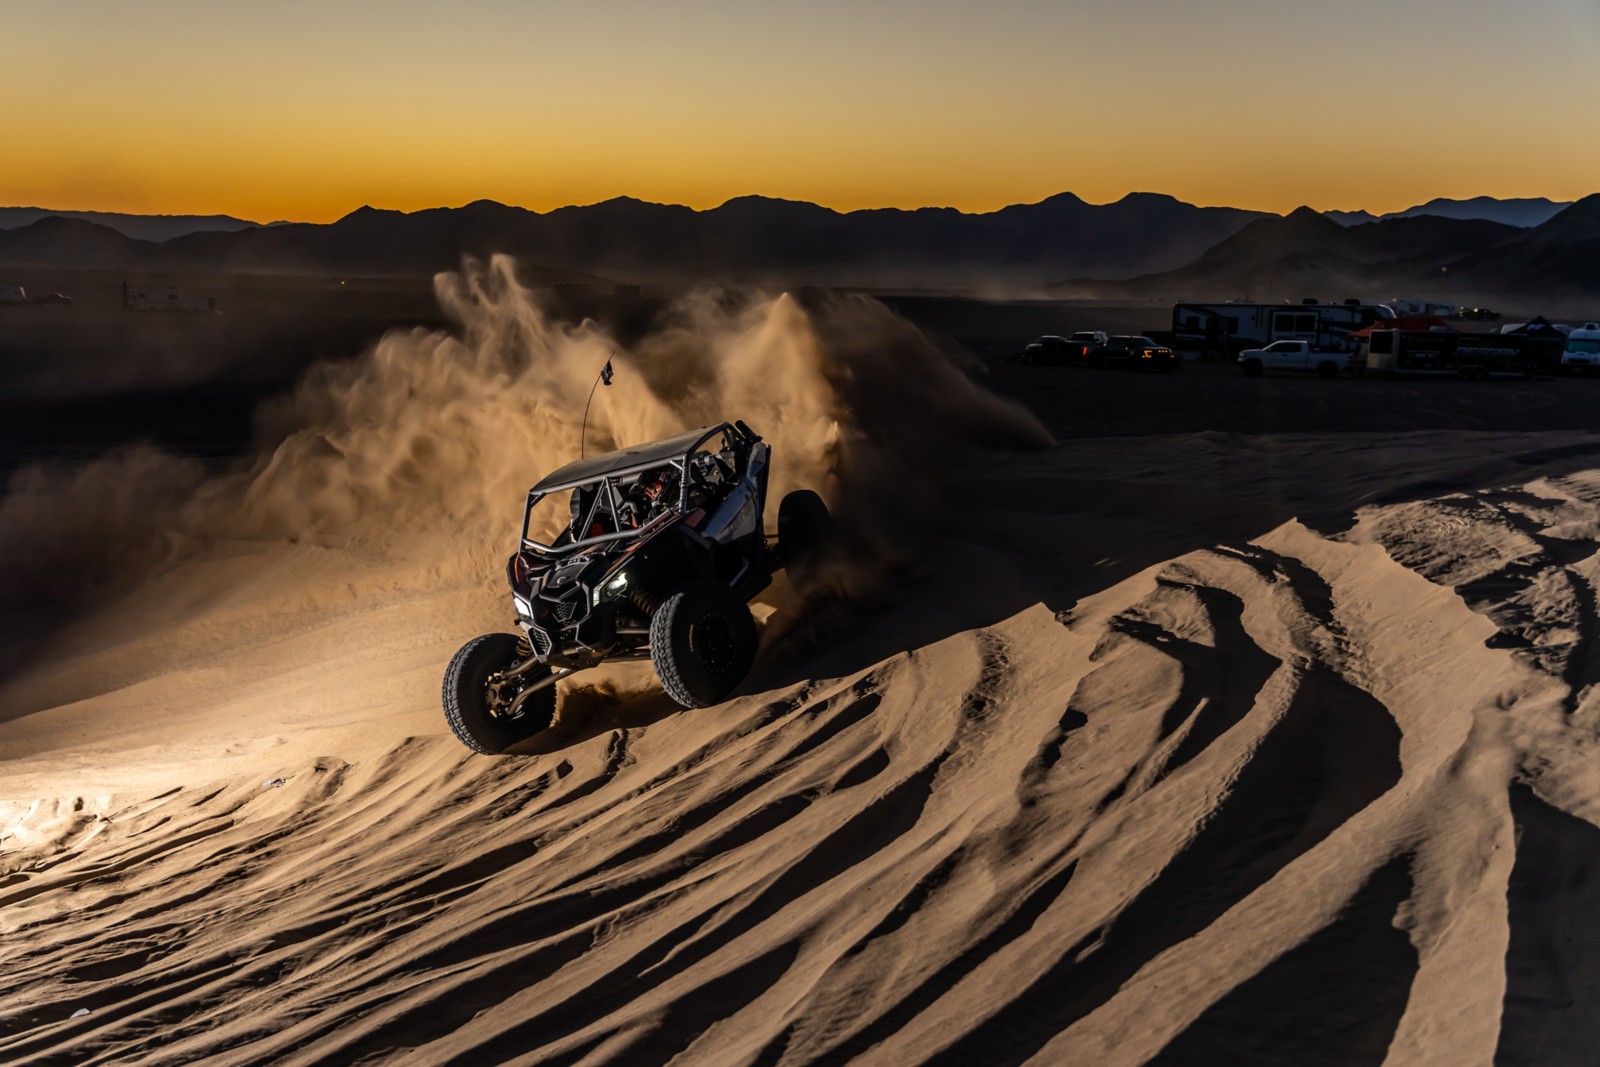 A rider enjoying the sand dunes at night with a Can-Am Off-Road vehicle